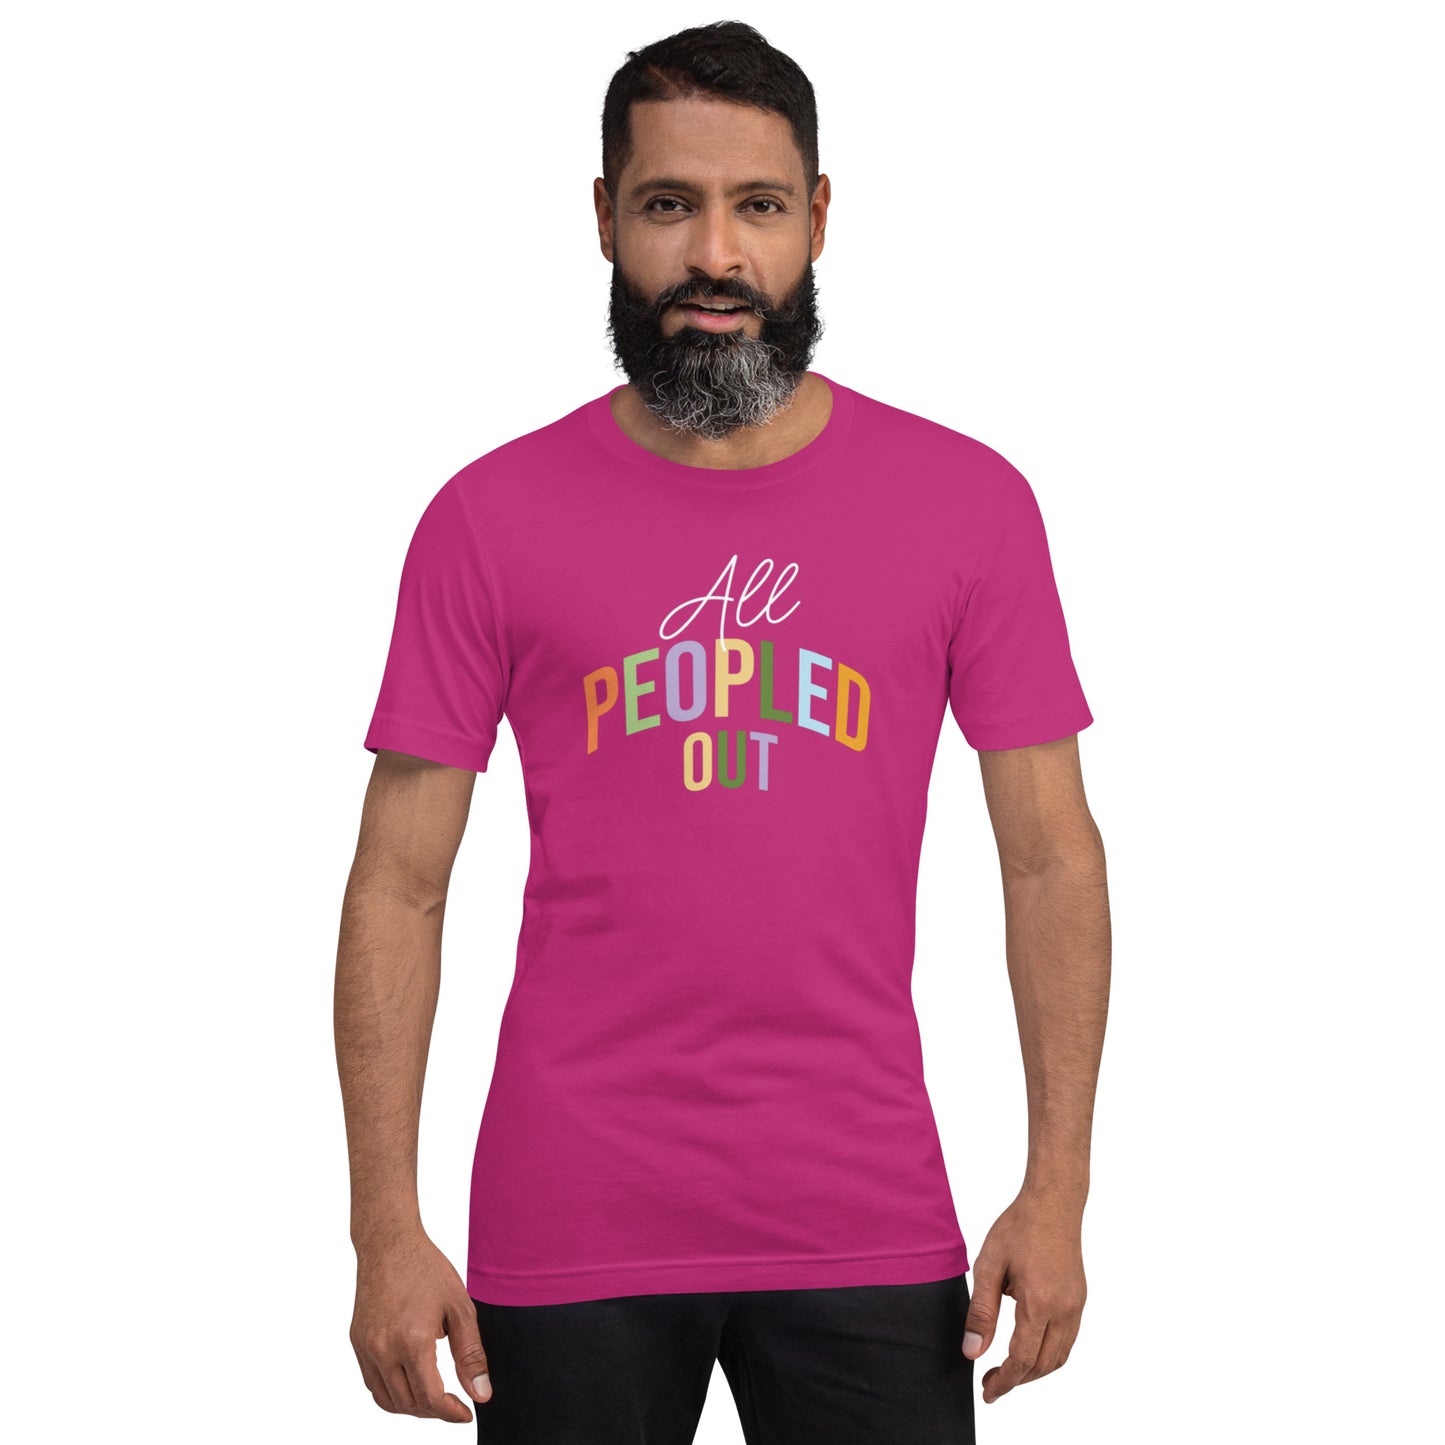 All PEOPLED OUT Unisex t-shirt